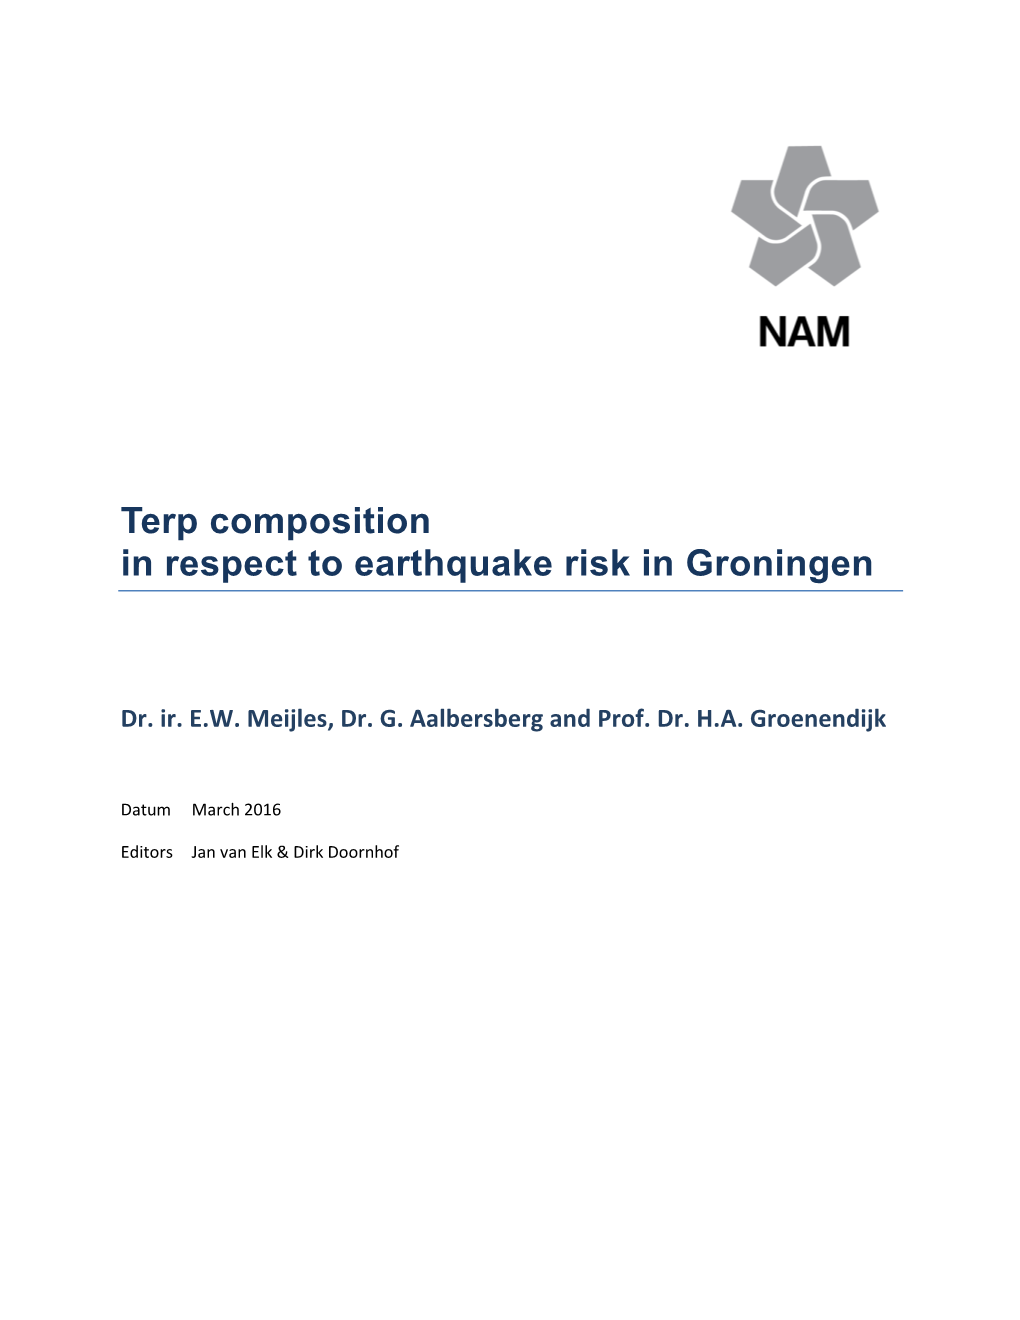 Terp Composition in Respect to Earthquake Risk in Groningen